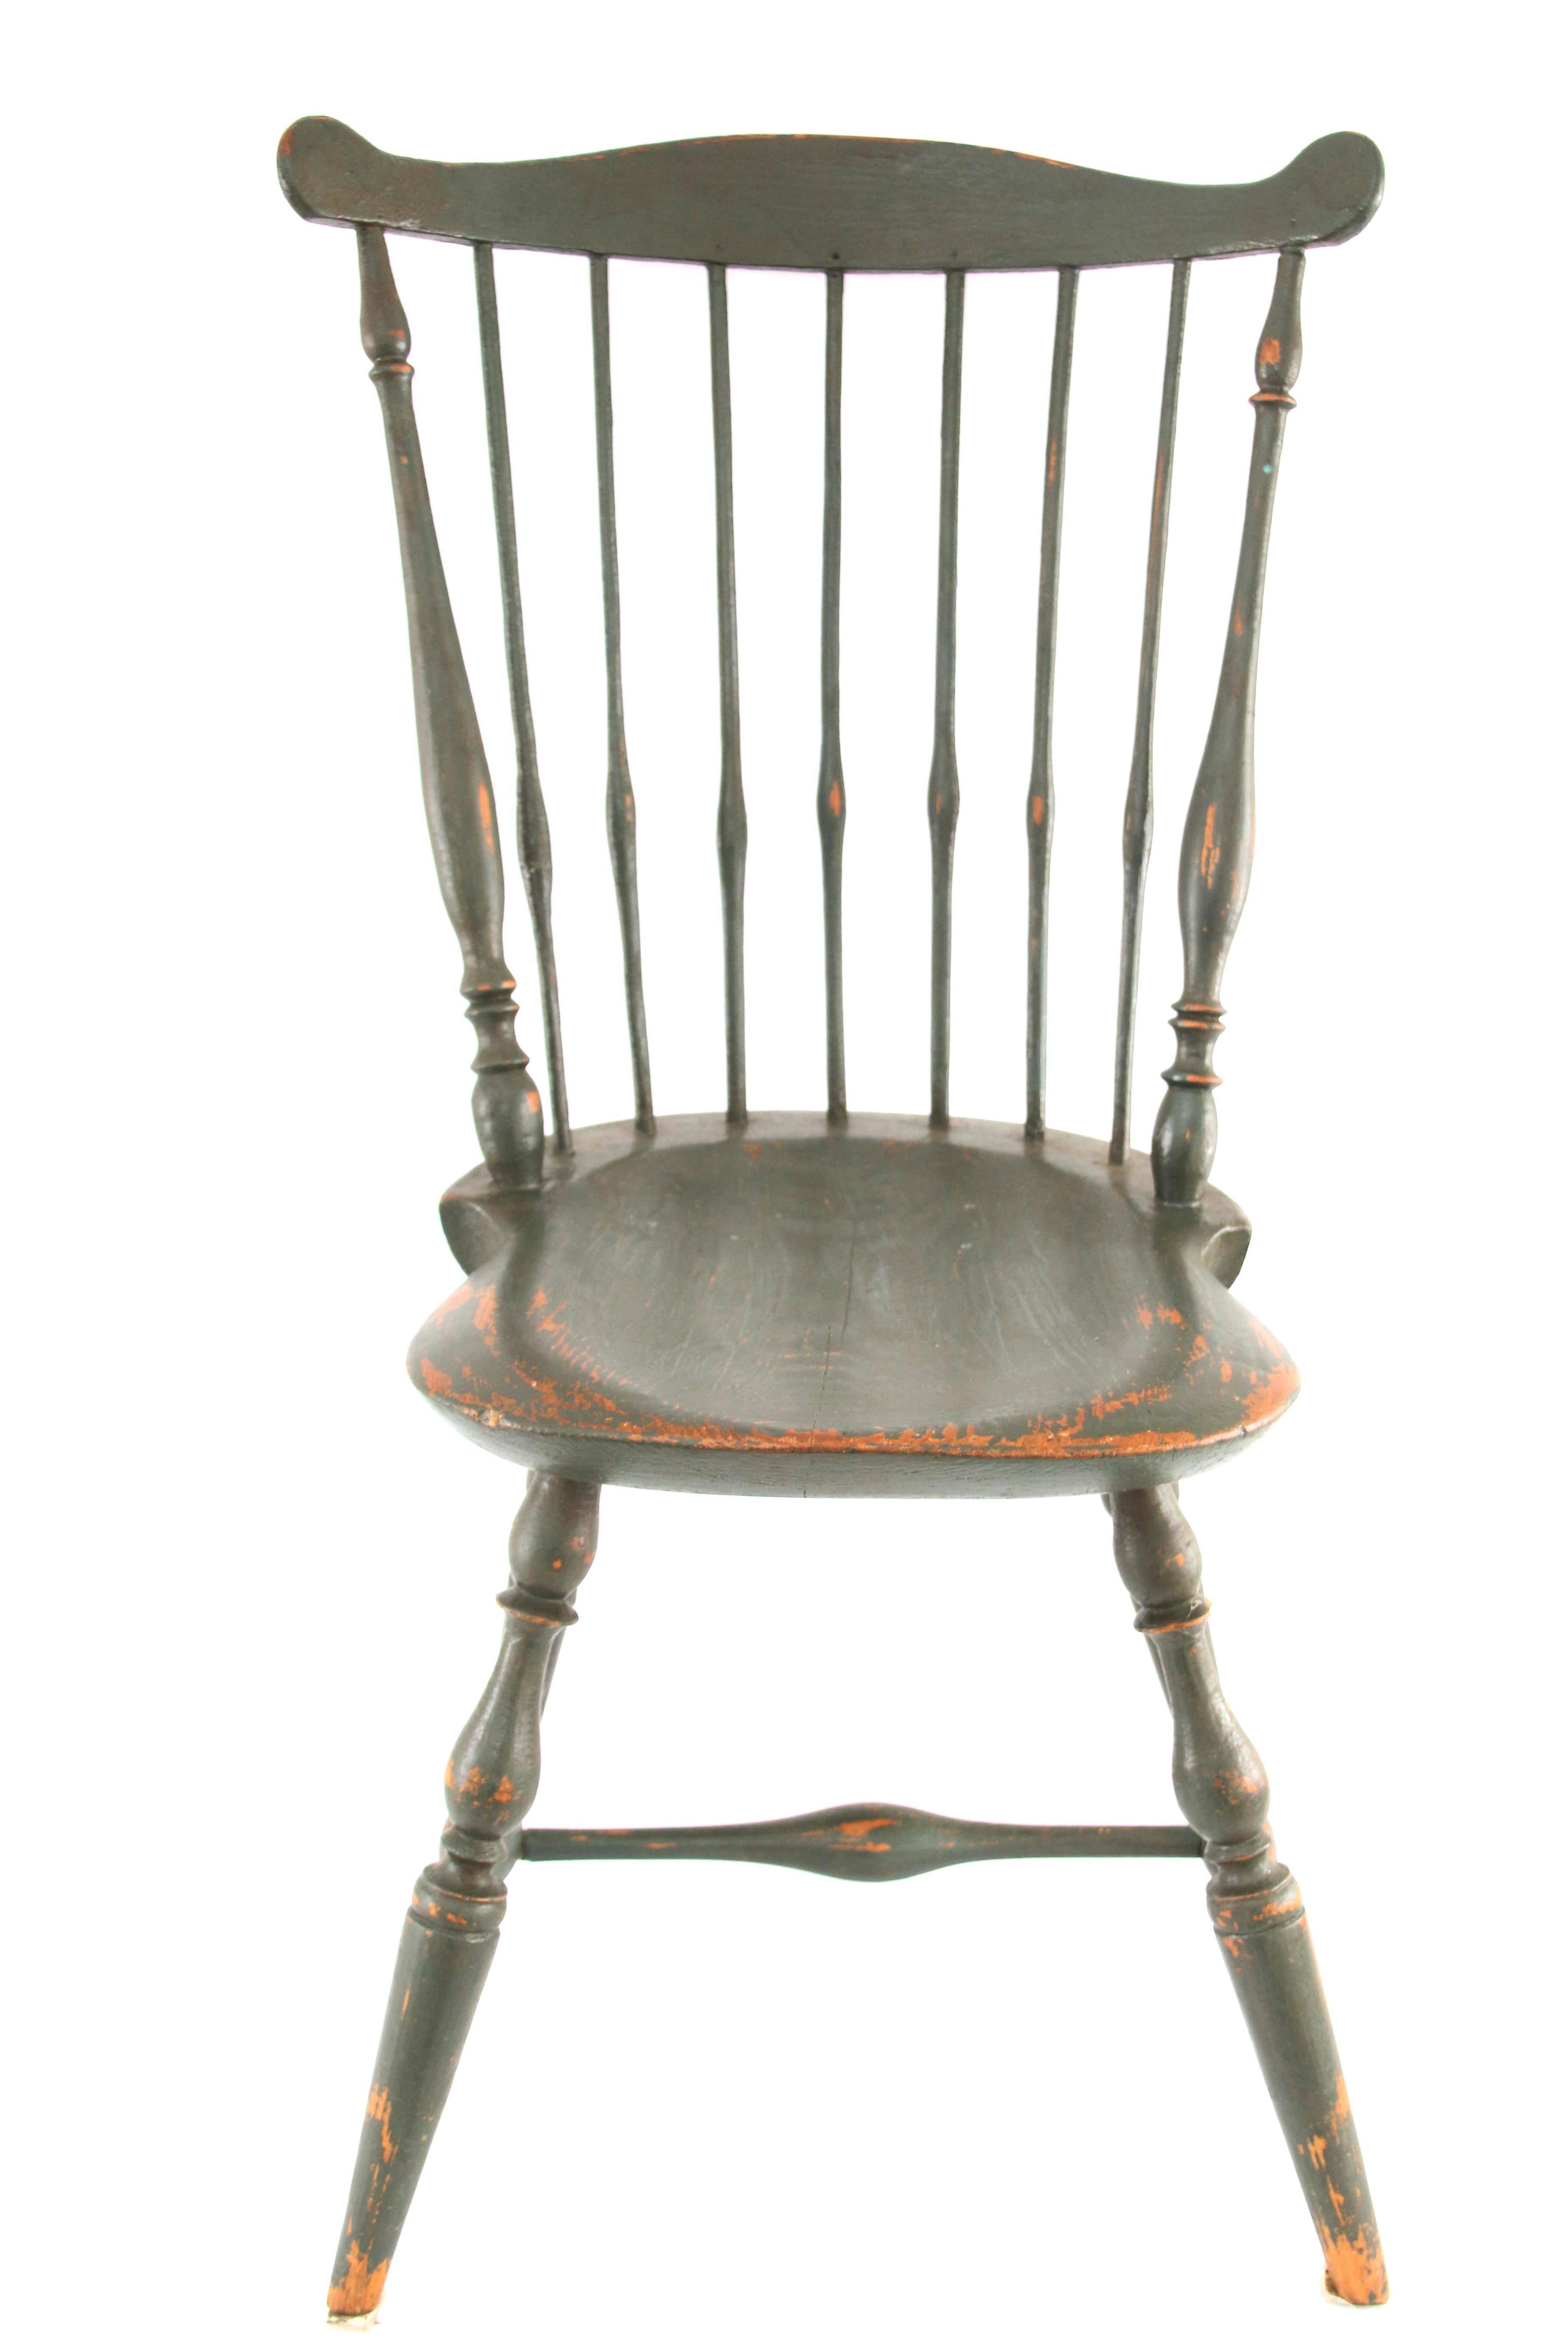 Connecticut Windsor Side Chair Signed I. Clark, circa 1800 For Sale 2